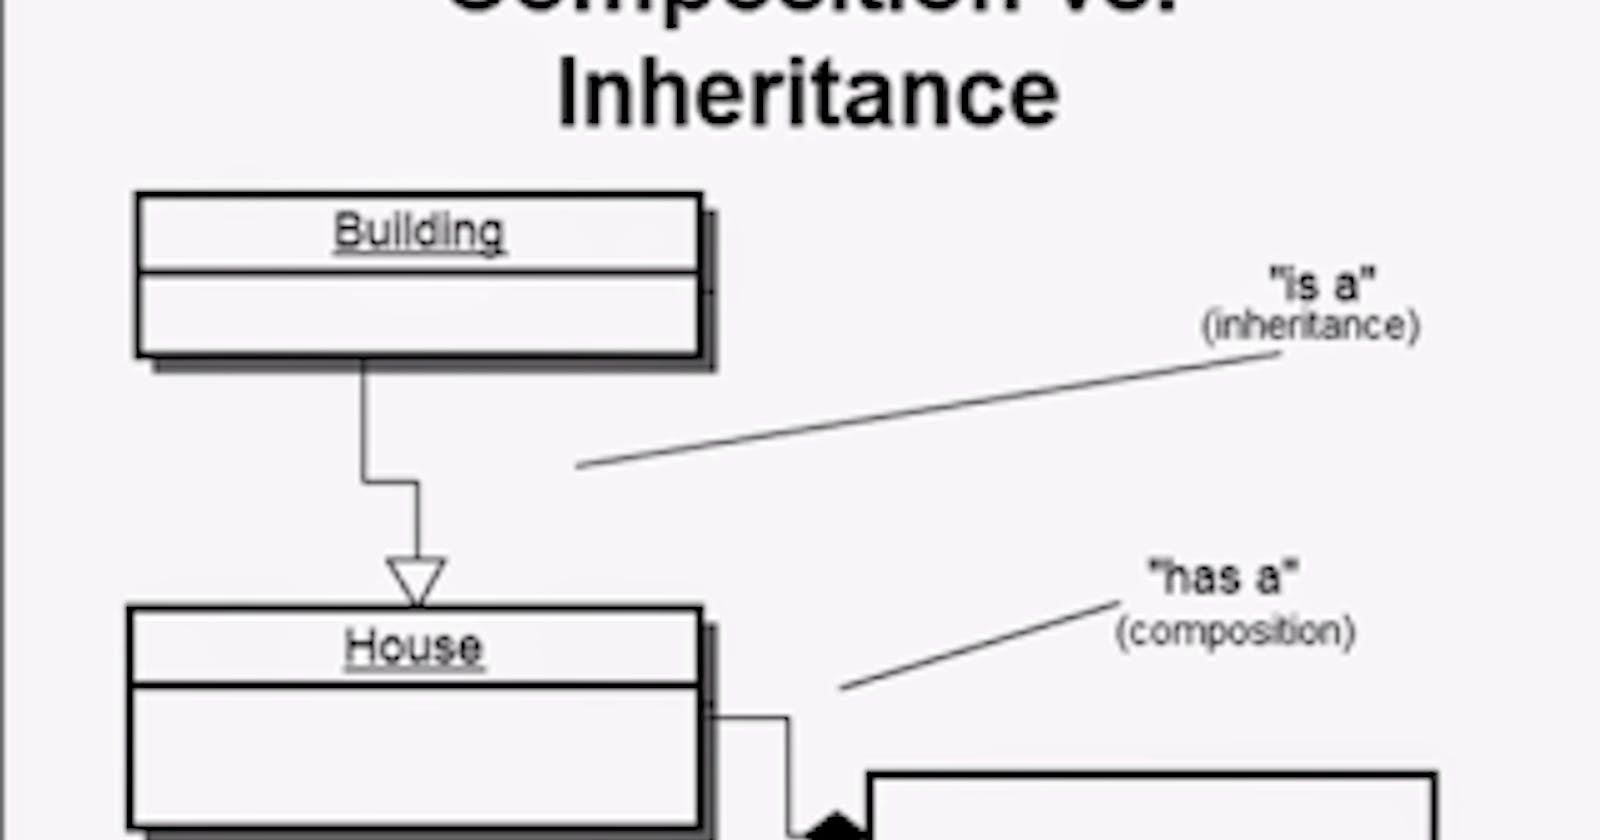 Composition over Inheritance in PHP